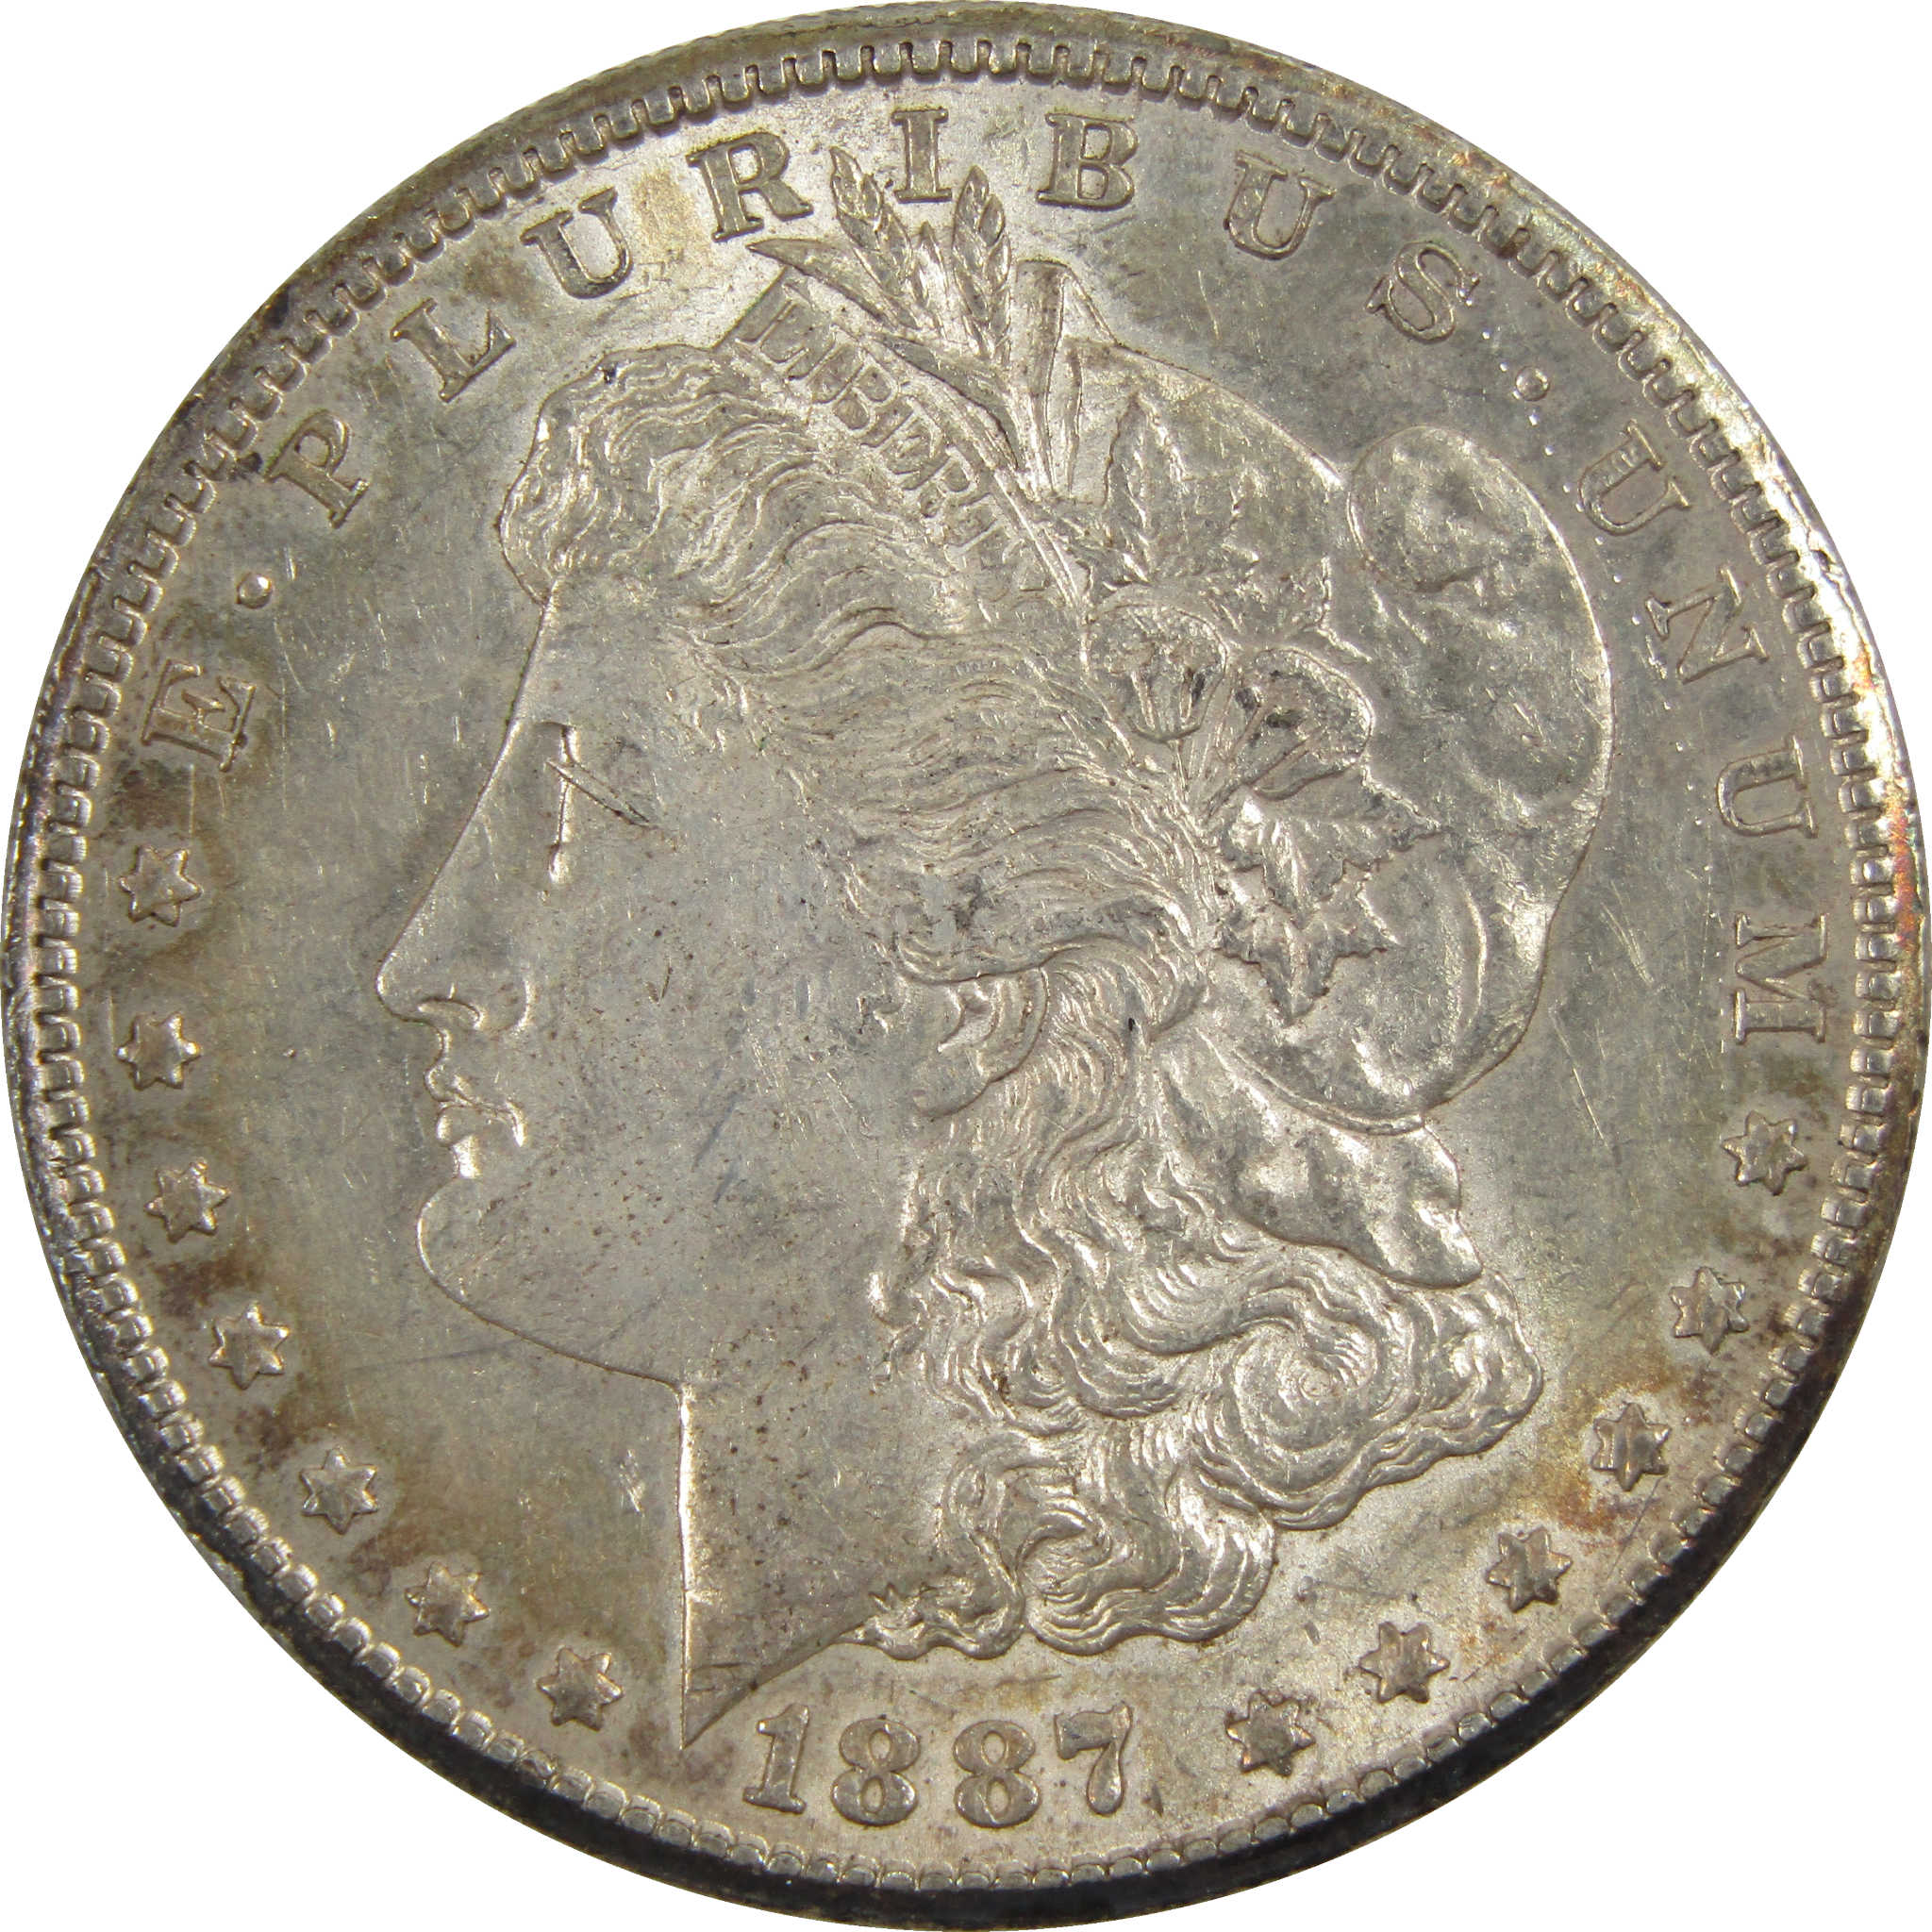 1887 S Morgan Dollar Choice About Uncirculated 90% Silver SKU:I8126 - Morgan coin - Morgan silver dollar - Morgan silver dollar for sale - Profile Coins &amp; Collectibles